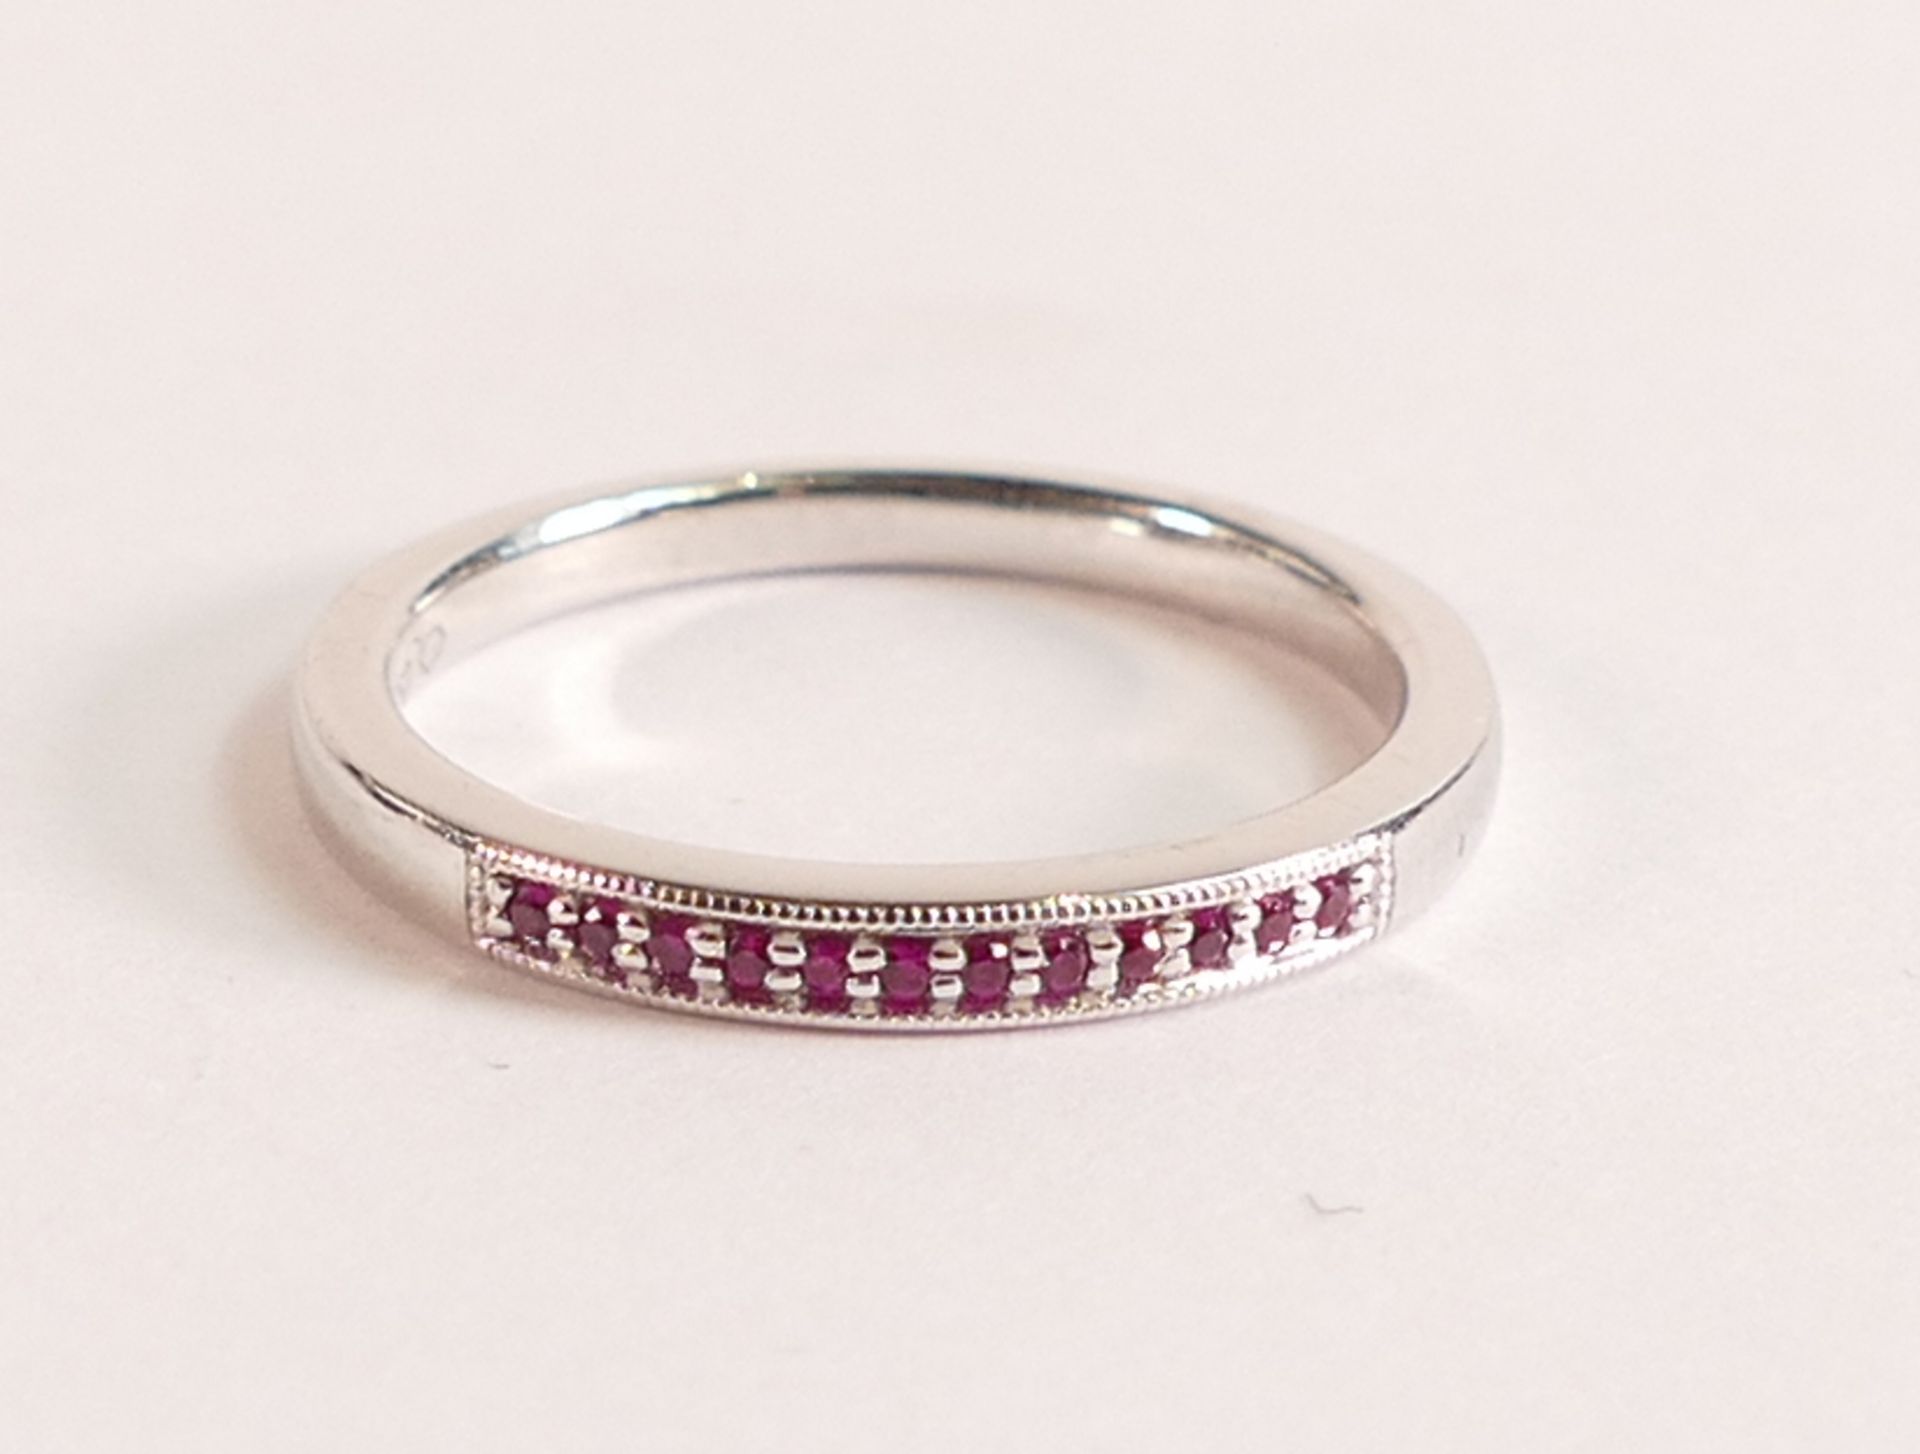 18ct White Gold and Ruby Ring - This sleek half eternity ring is made in 18ct White Gold and is